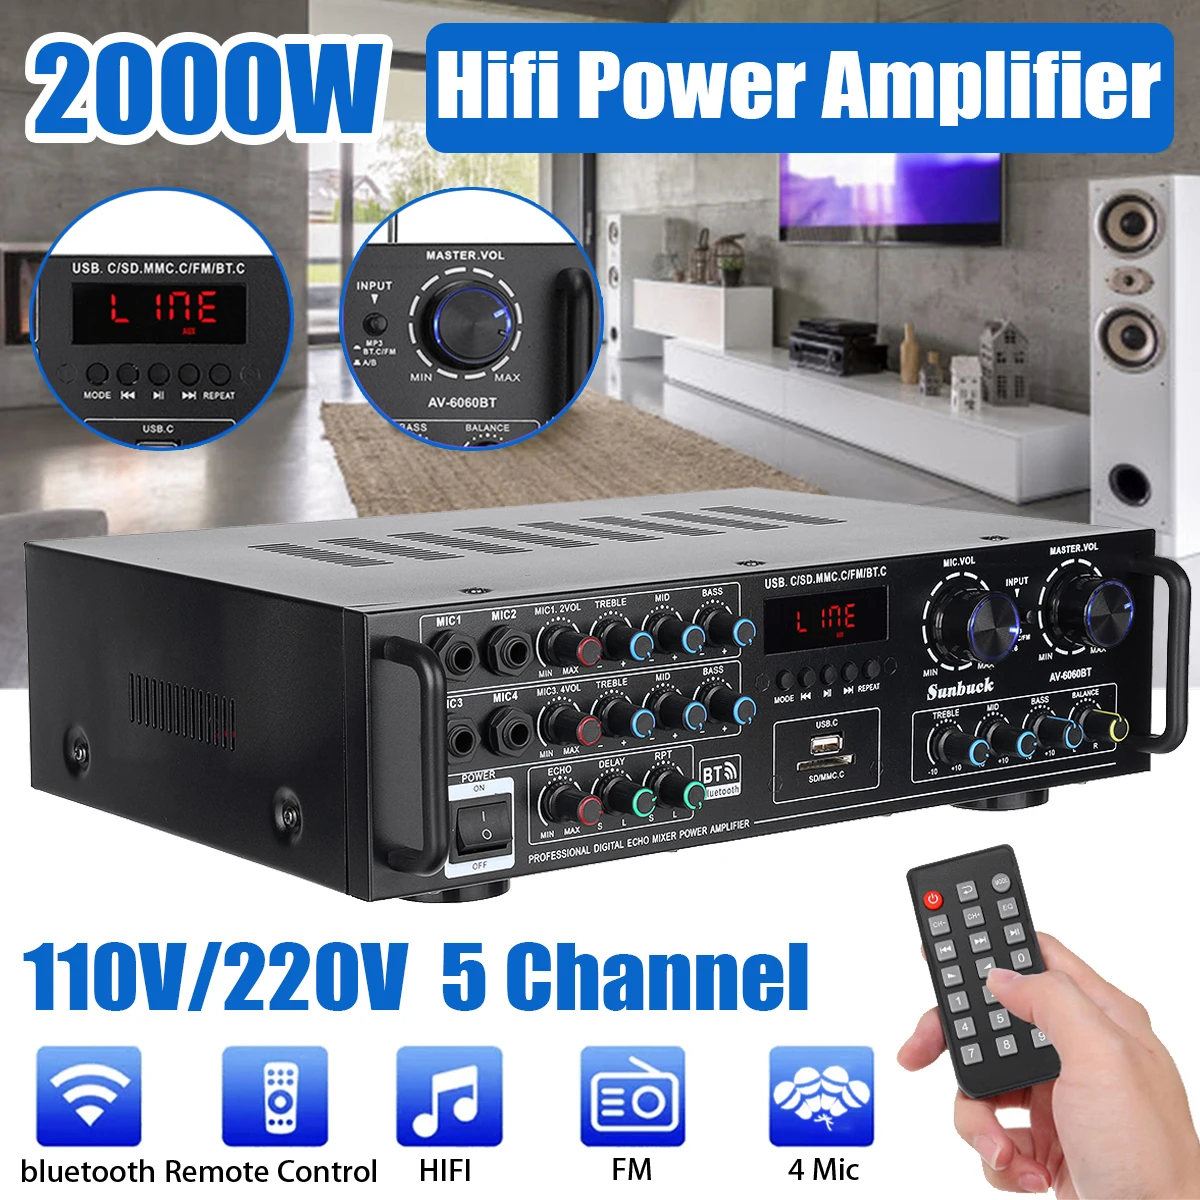 2000W Home Amplifiers Audio 220V Bass Audio Power Bluetooth Digital Amplifier Hifi FM USB SD LED  for Subwoofer Speakers non inverting amplifier Audio Amplifier Boards